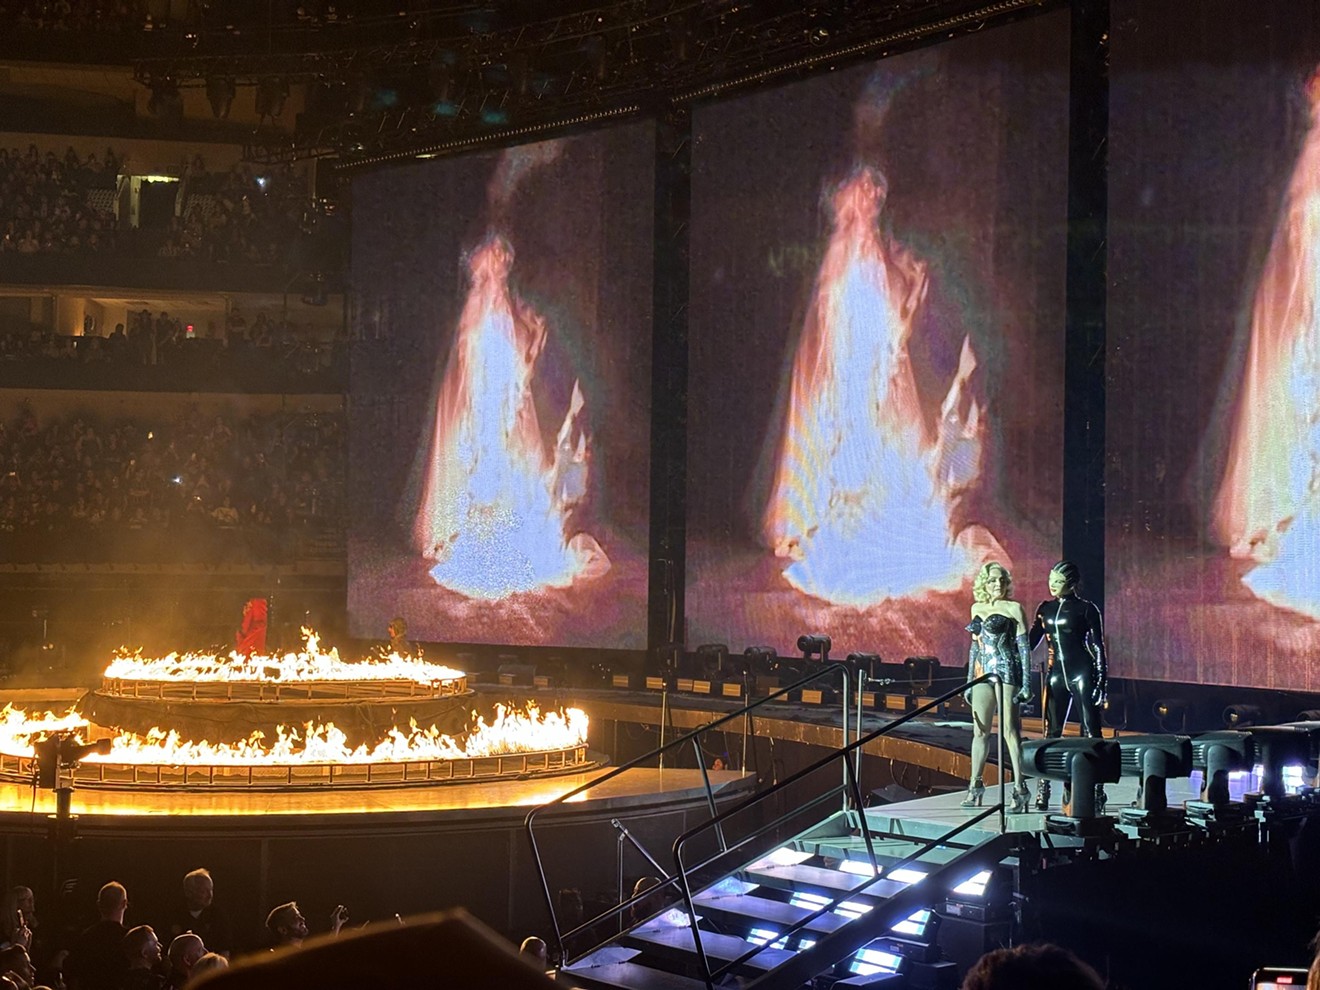 Madonna lit up the stage on Sunday night, at the first of two Dallas dates of her Celebration tour.